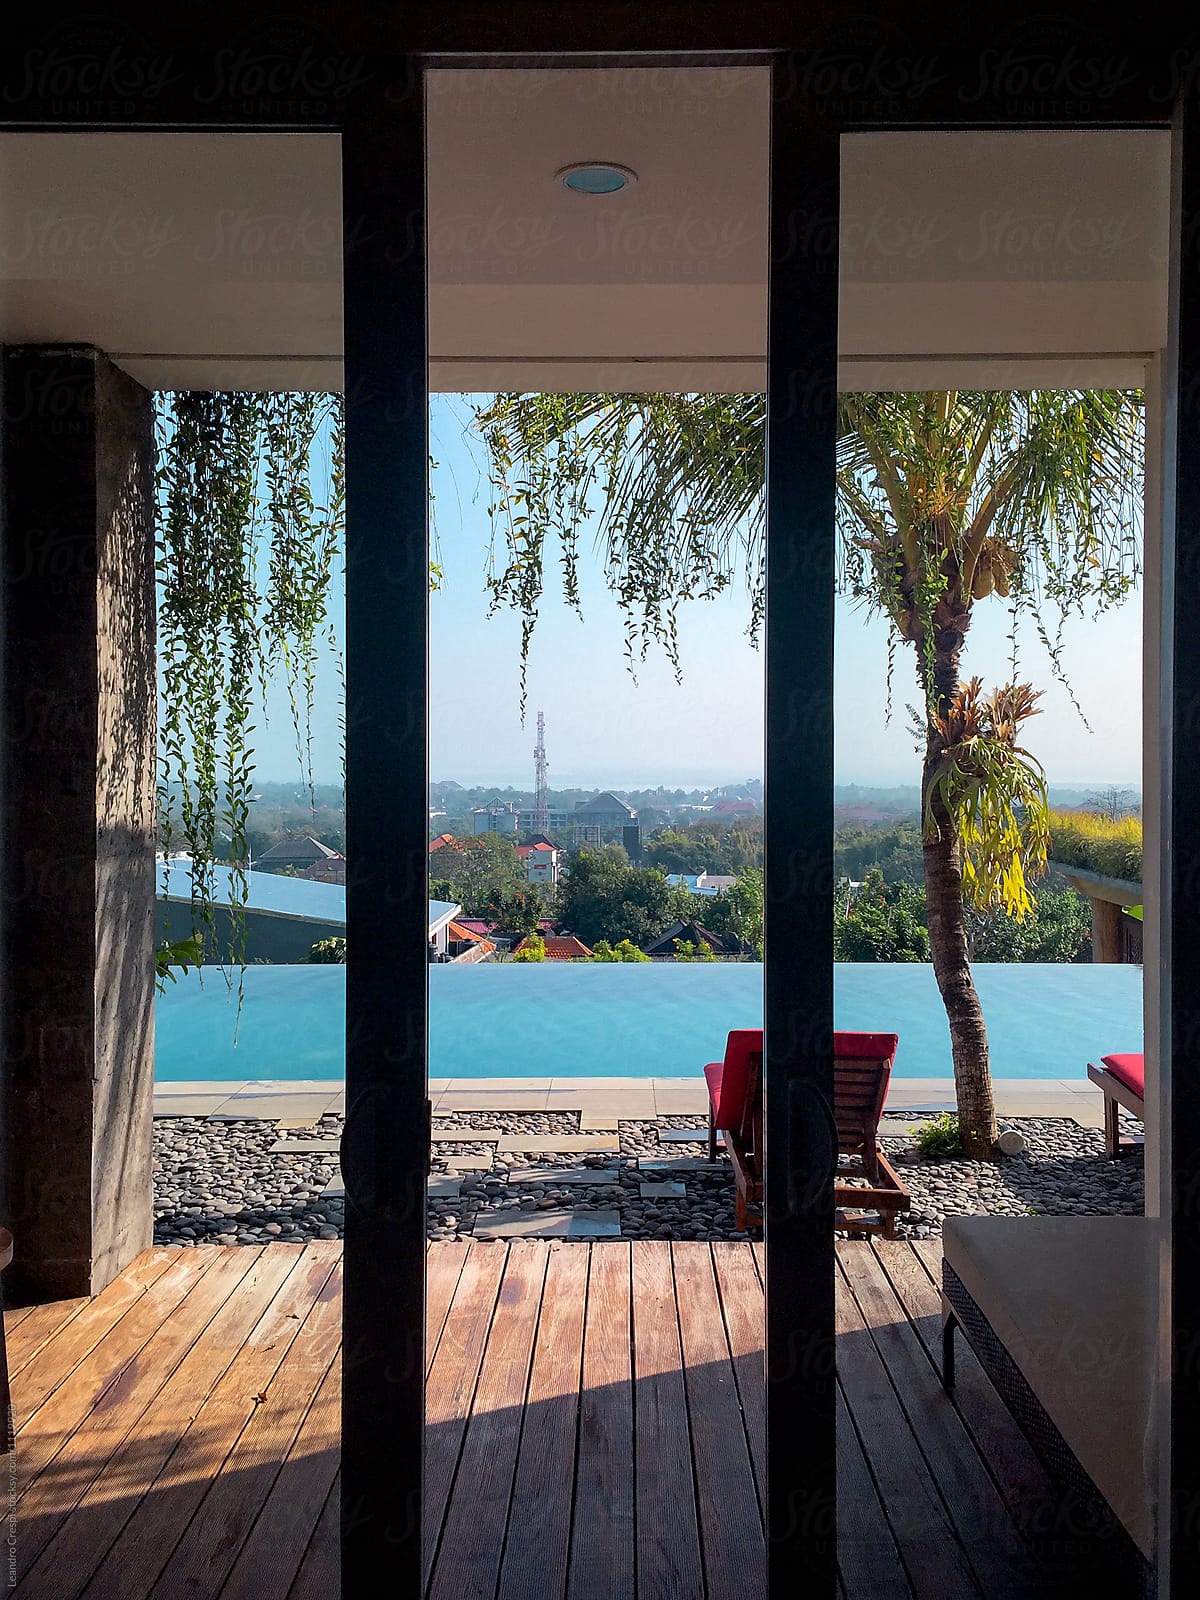 Windows views of a infinite pool and city from inside of a house